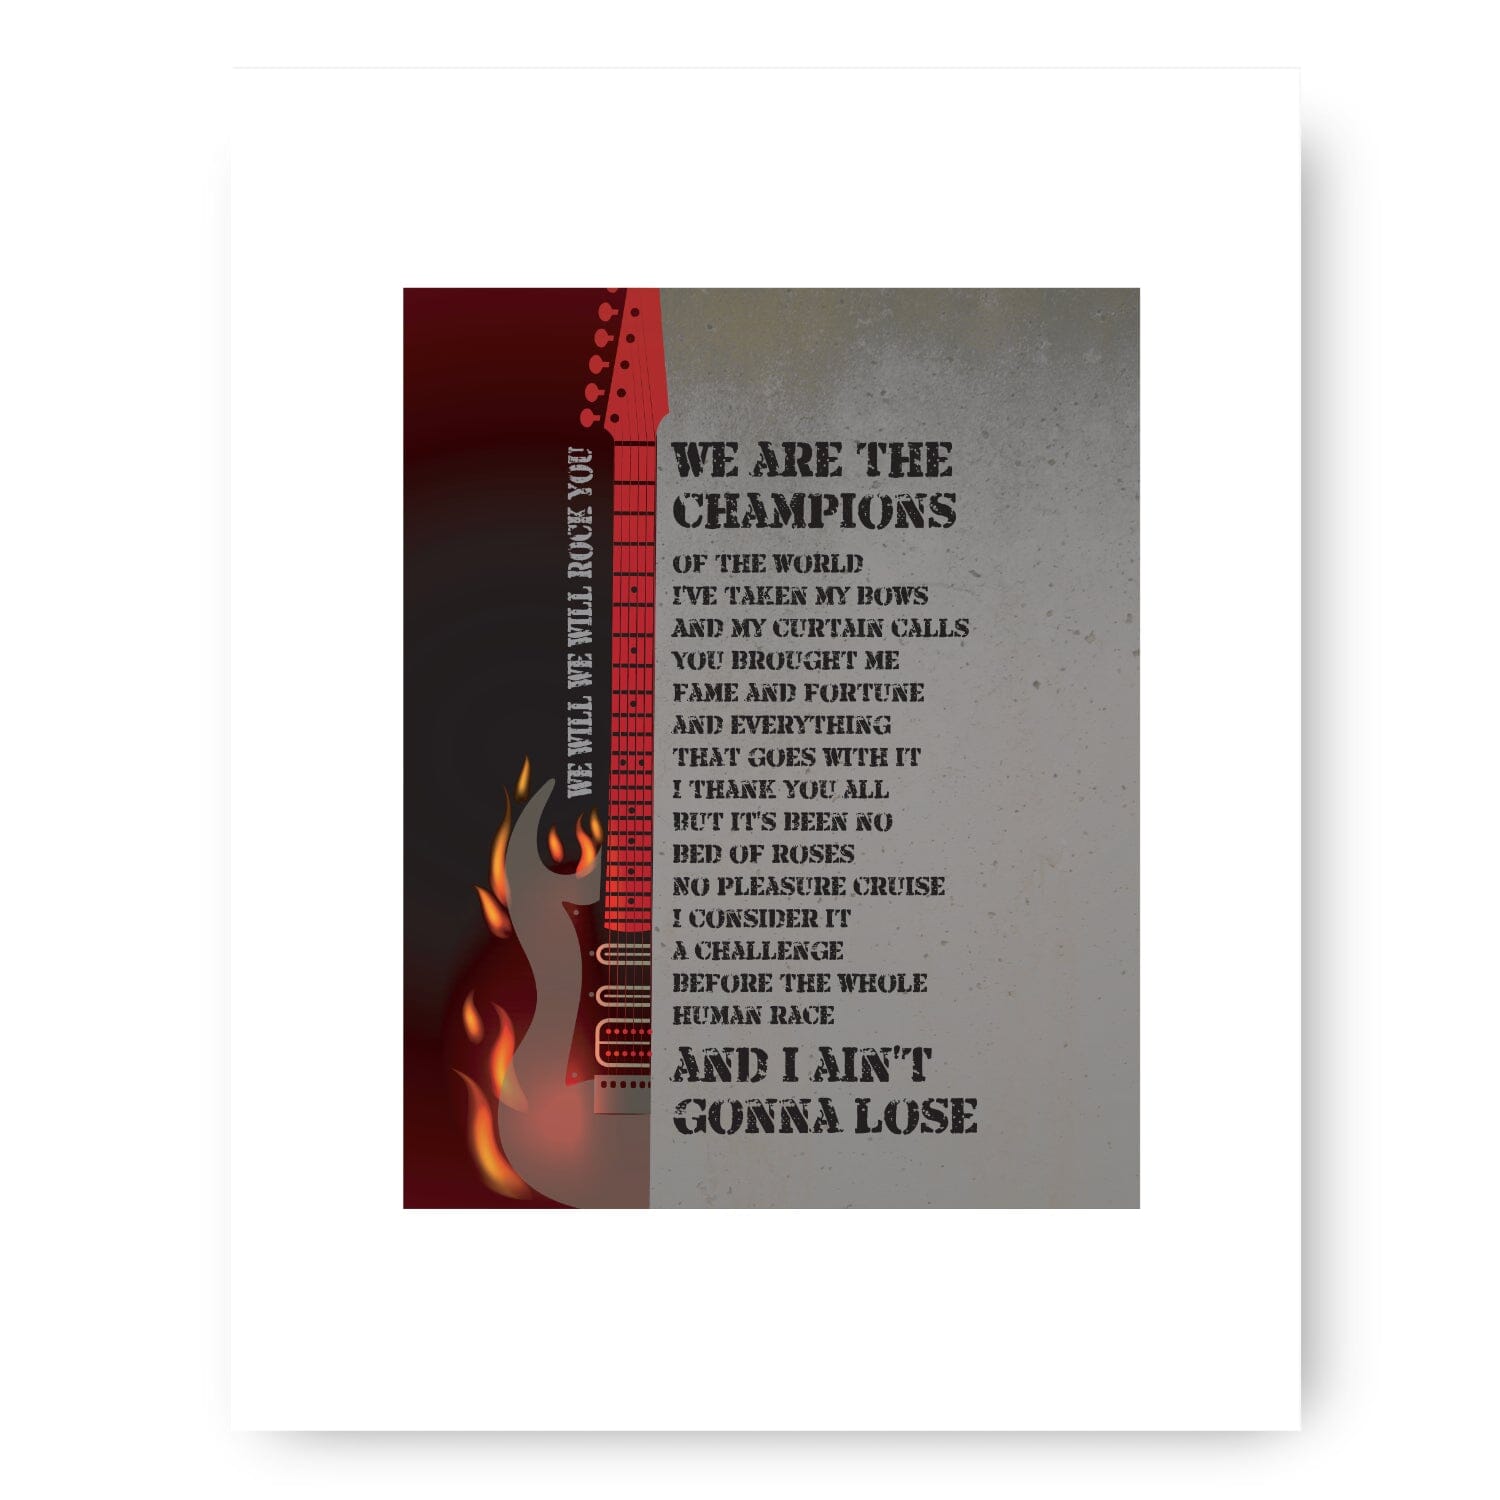 We Will Rock You, We are the Champions by Queen - Lyric Art Song Lyrics Art Song Lyrics Art 8x10 Black Matted Print 